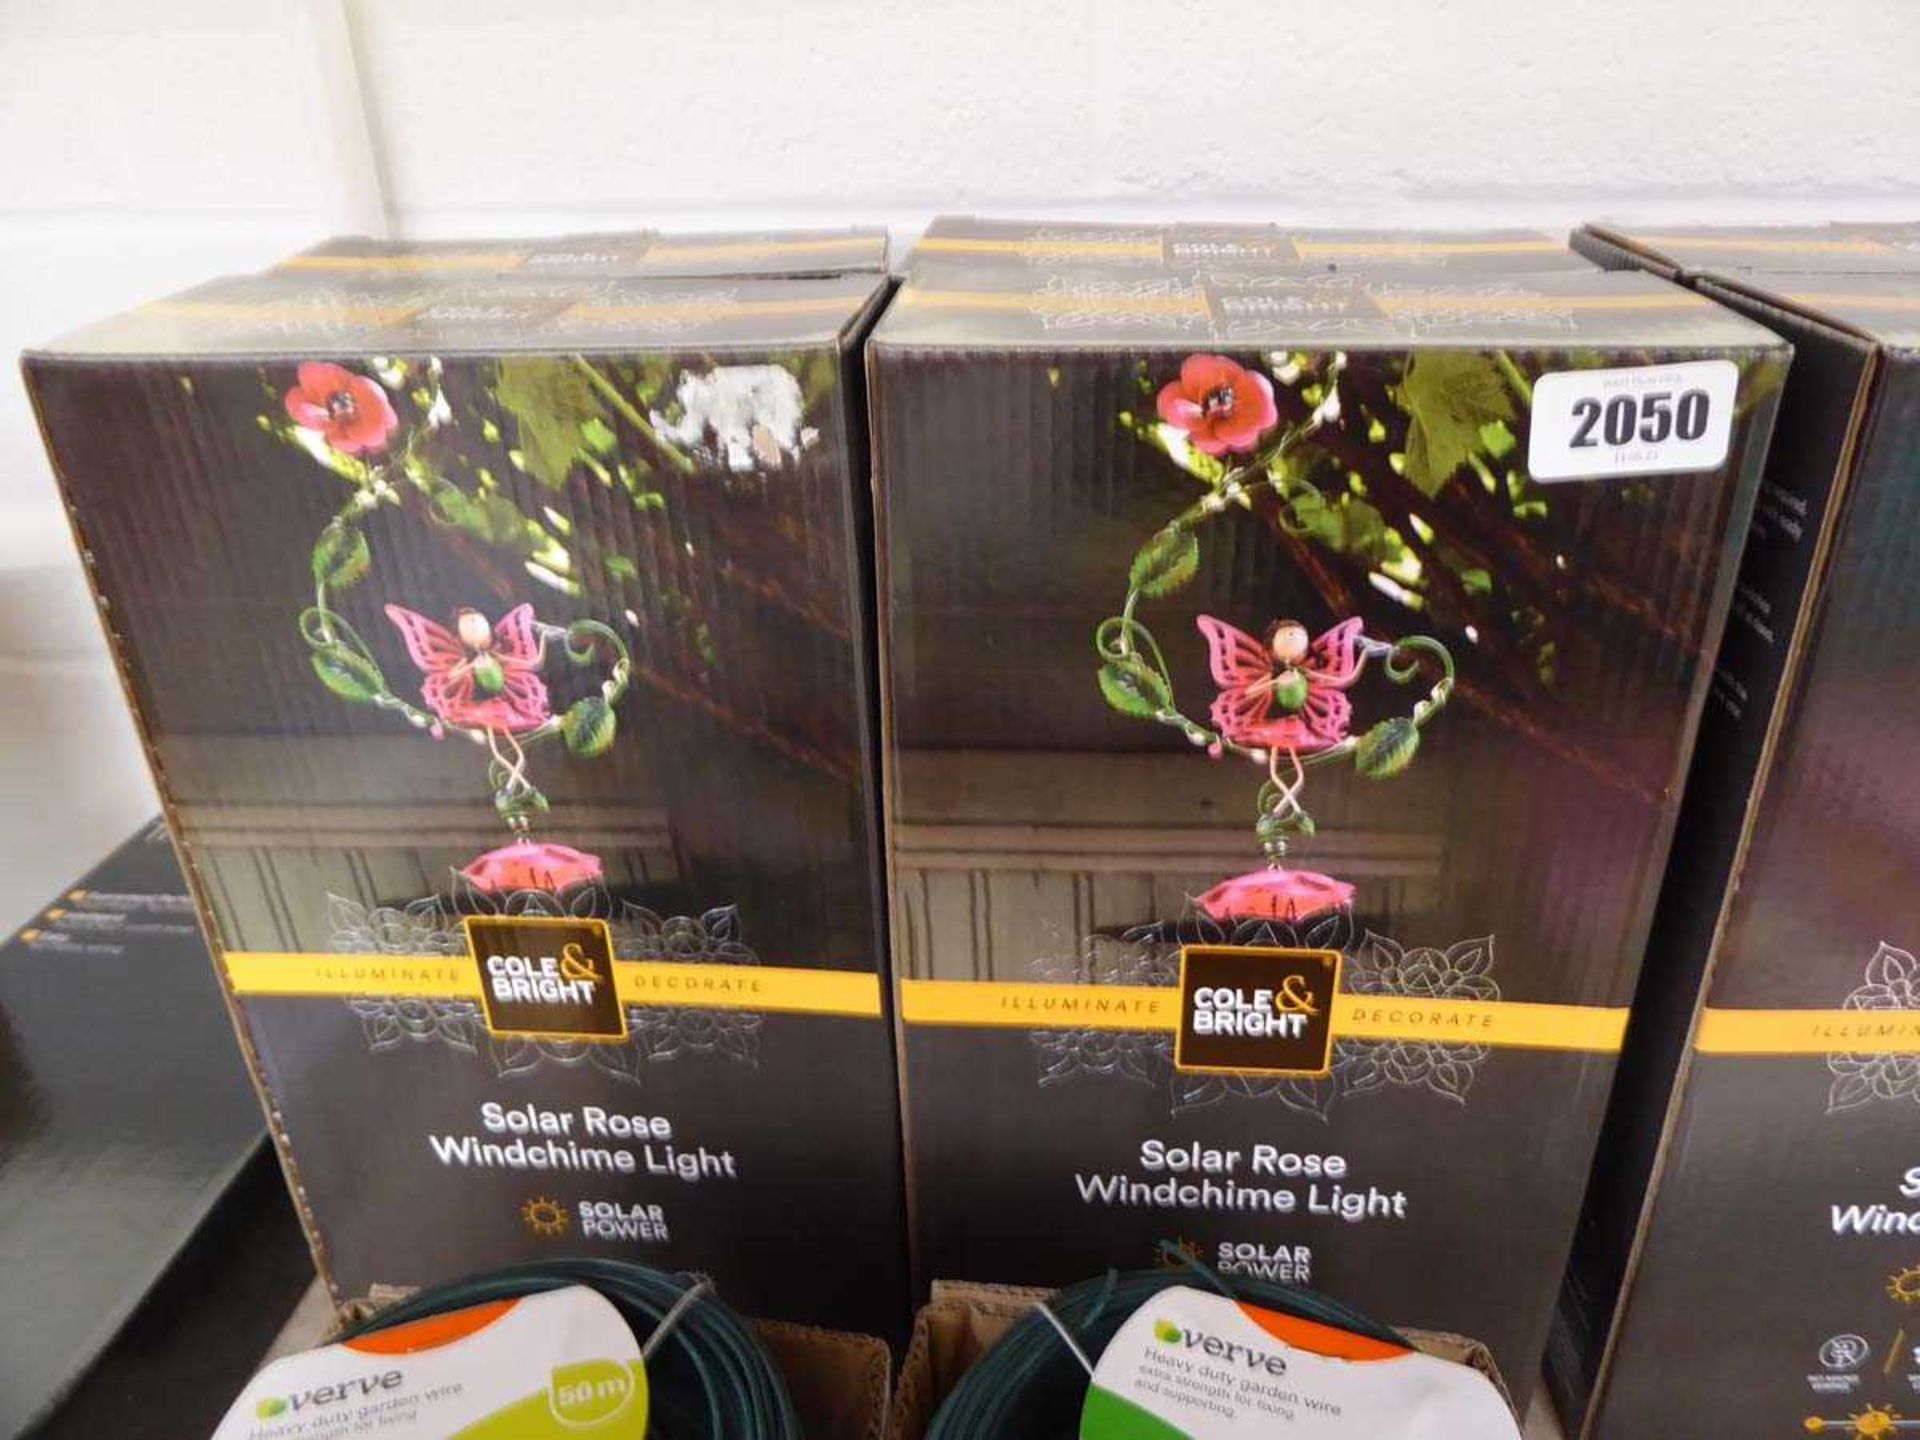 4 boxed Cole & Bright solar daisy and rose wind chime lights